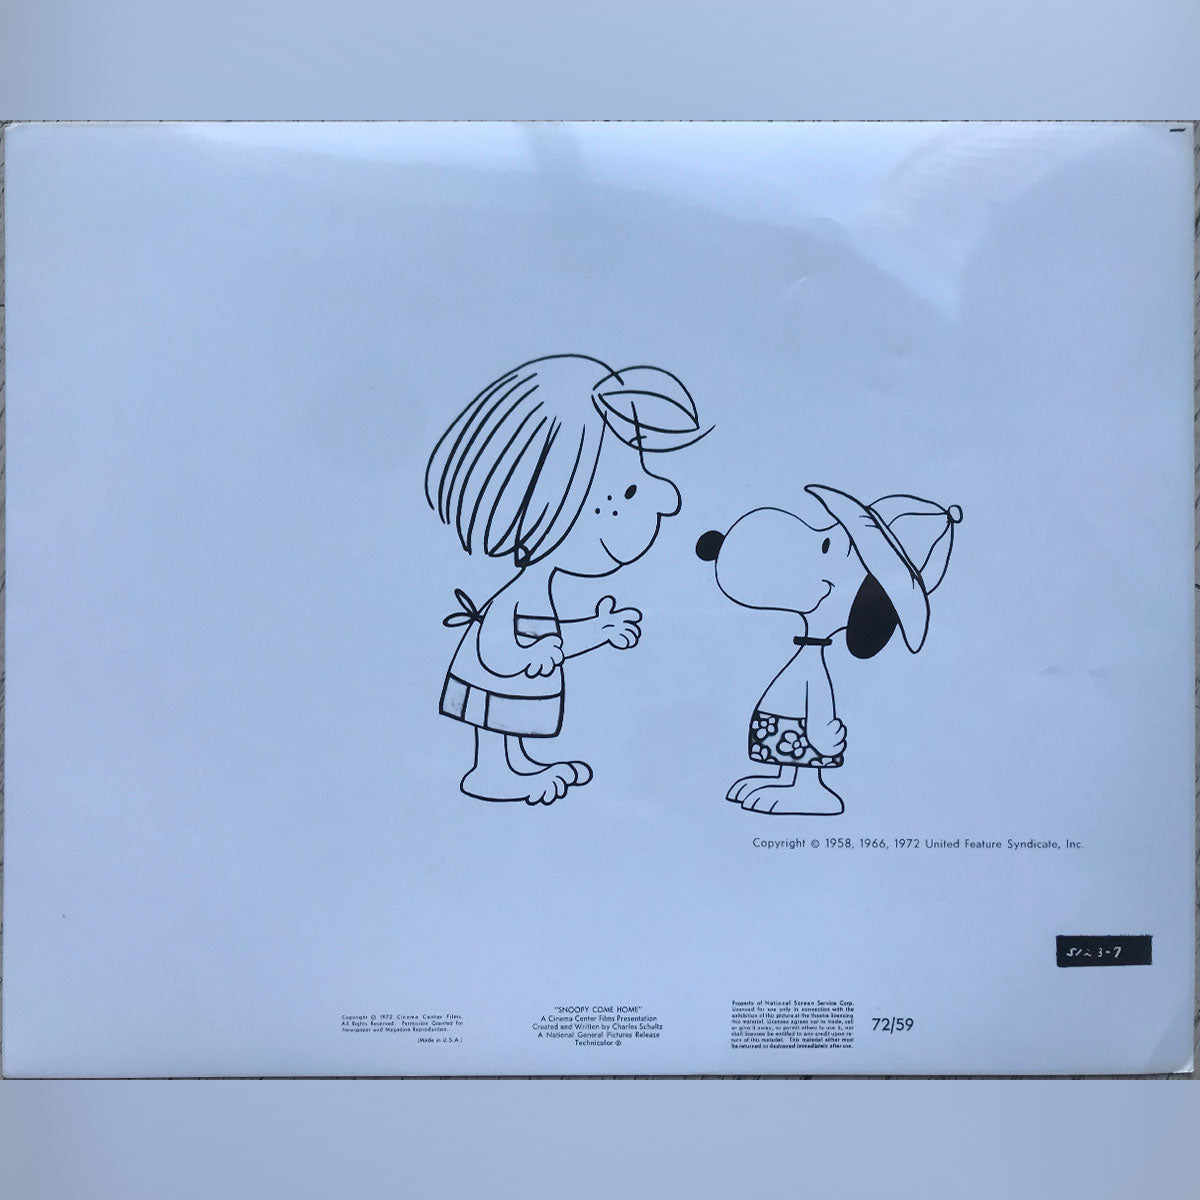 Snoopy Come Home (1972)